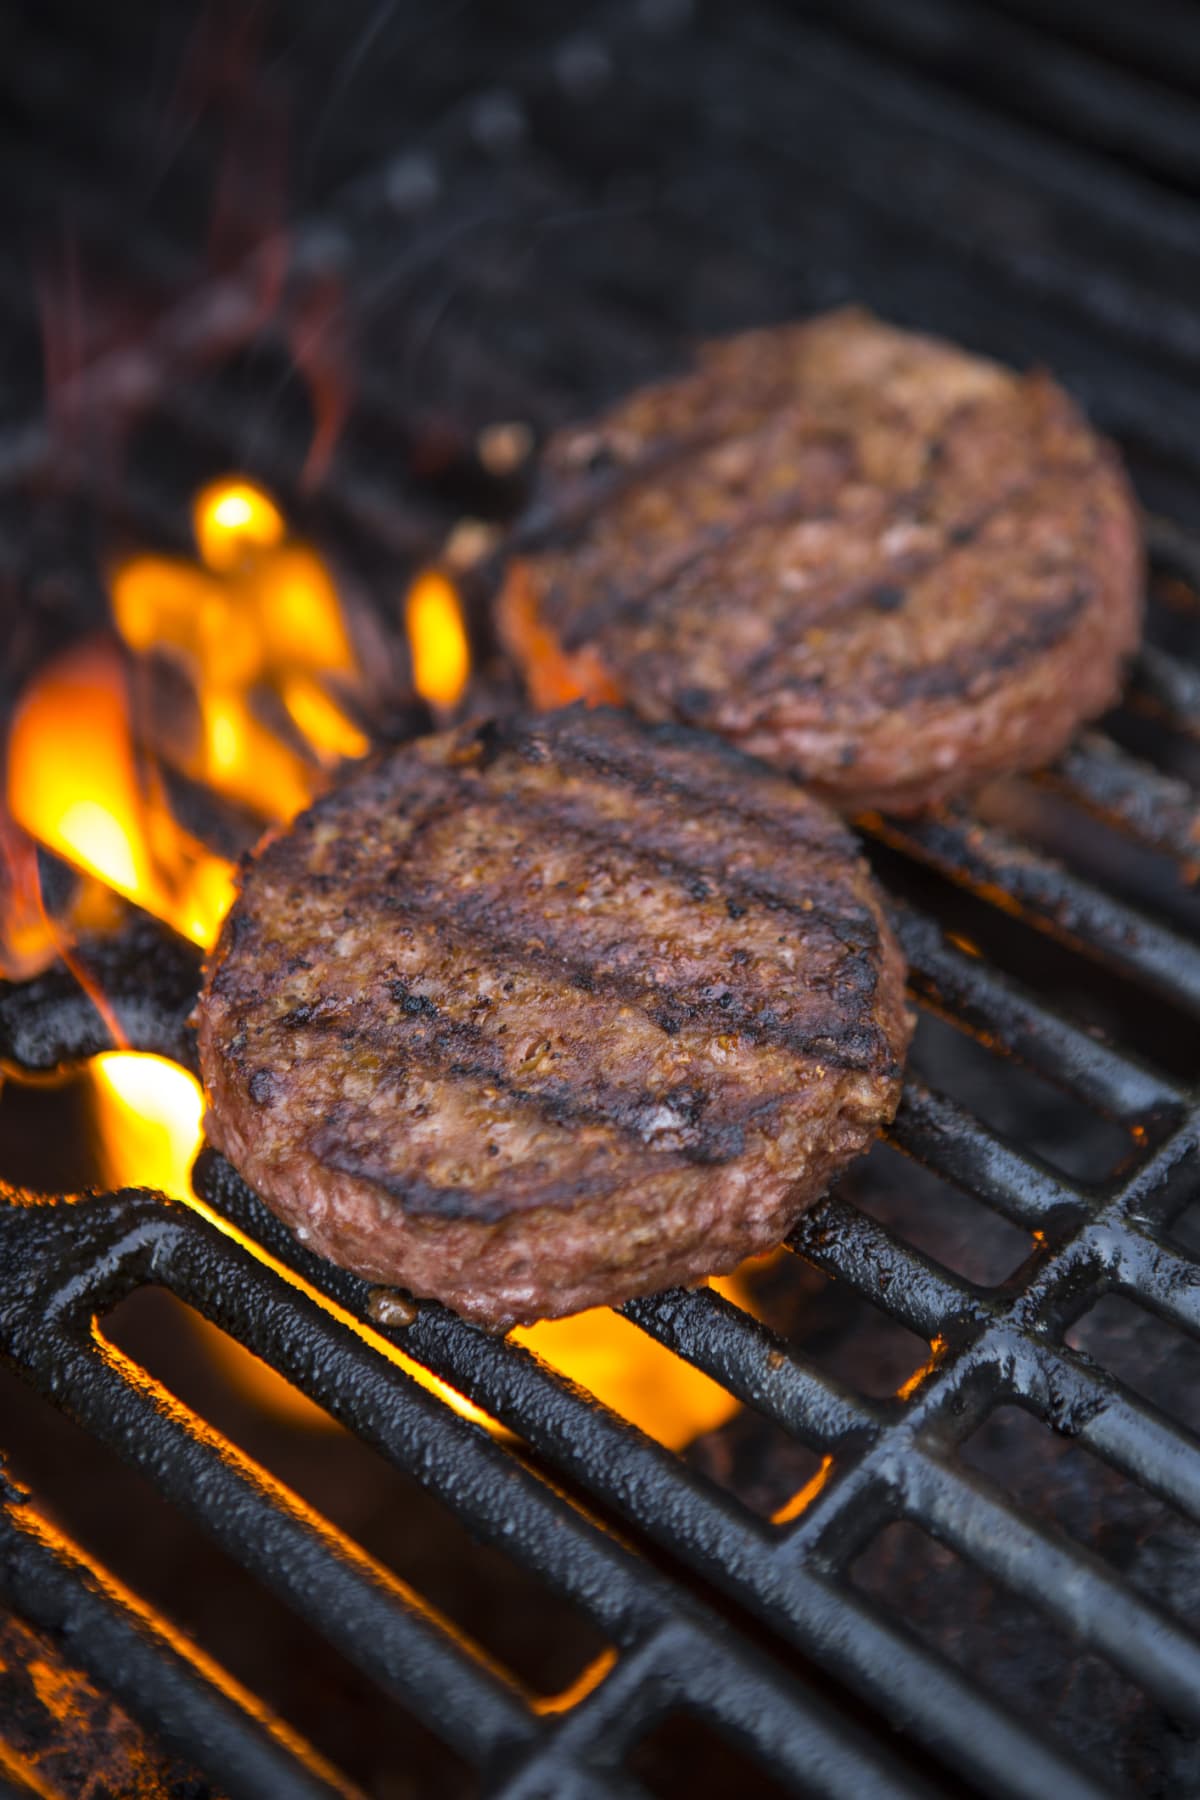 Plant-based burgers charring on a grill